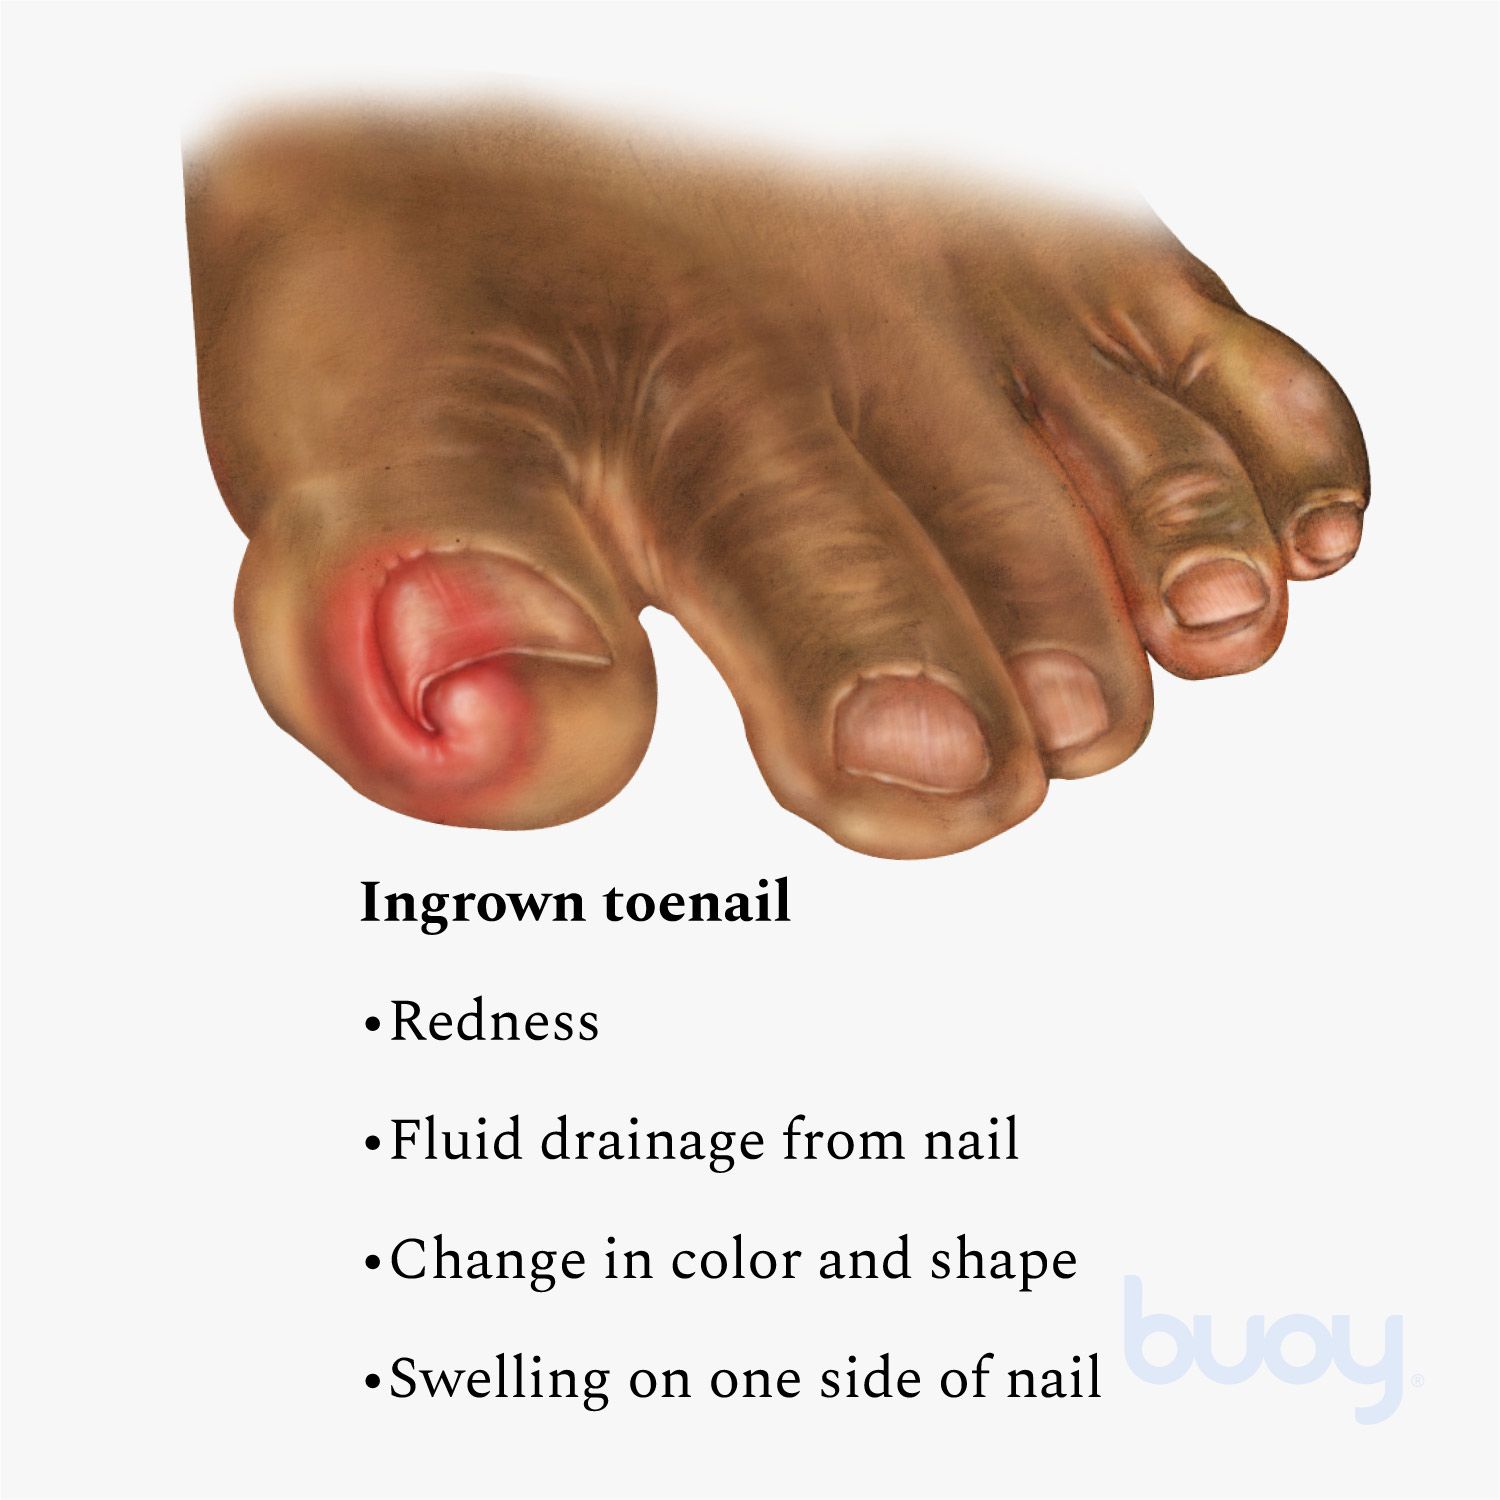 Watch Out for Ingrown Toenails